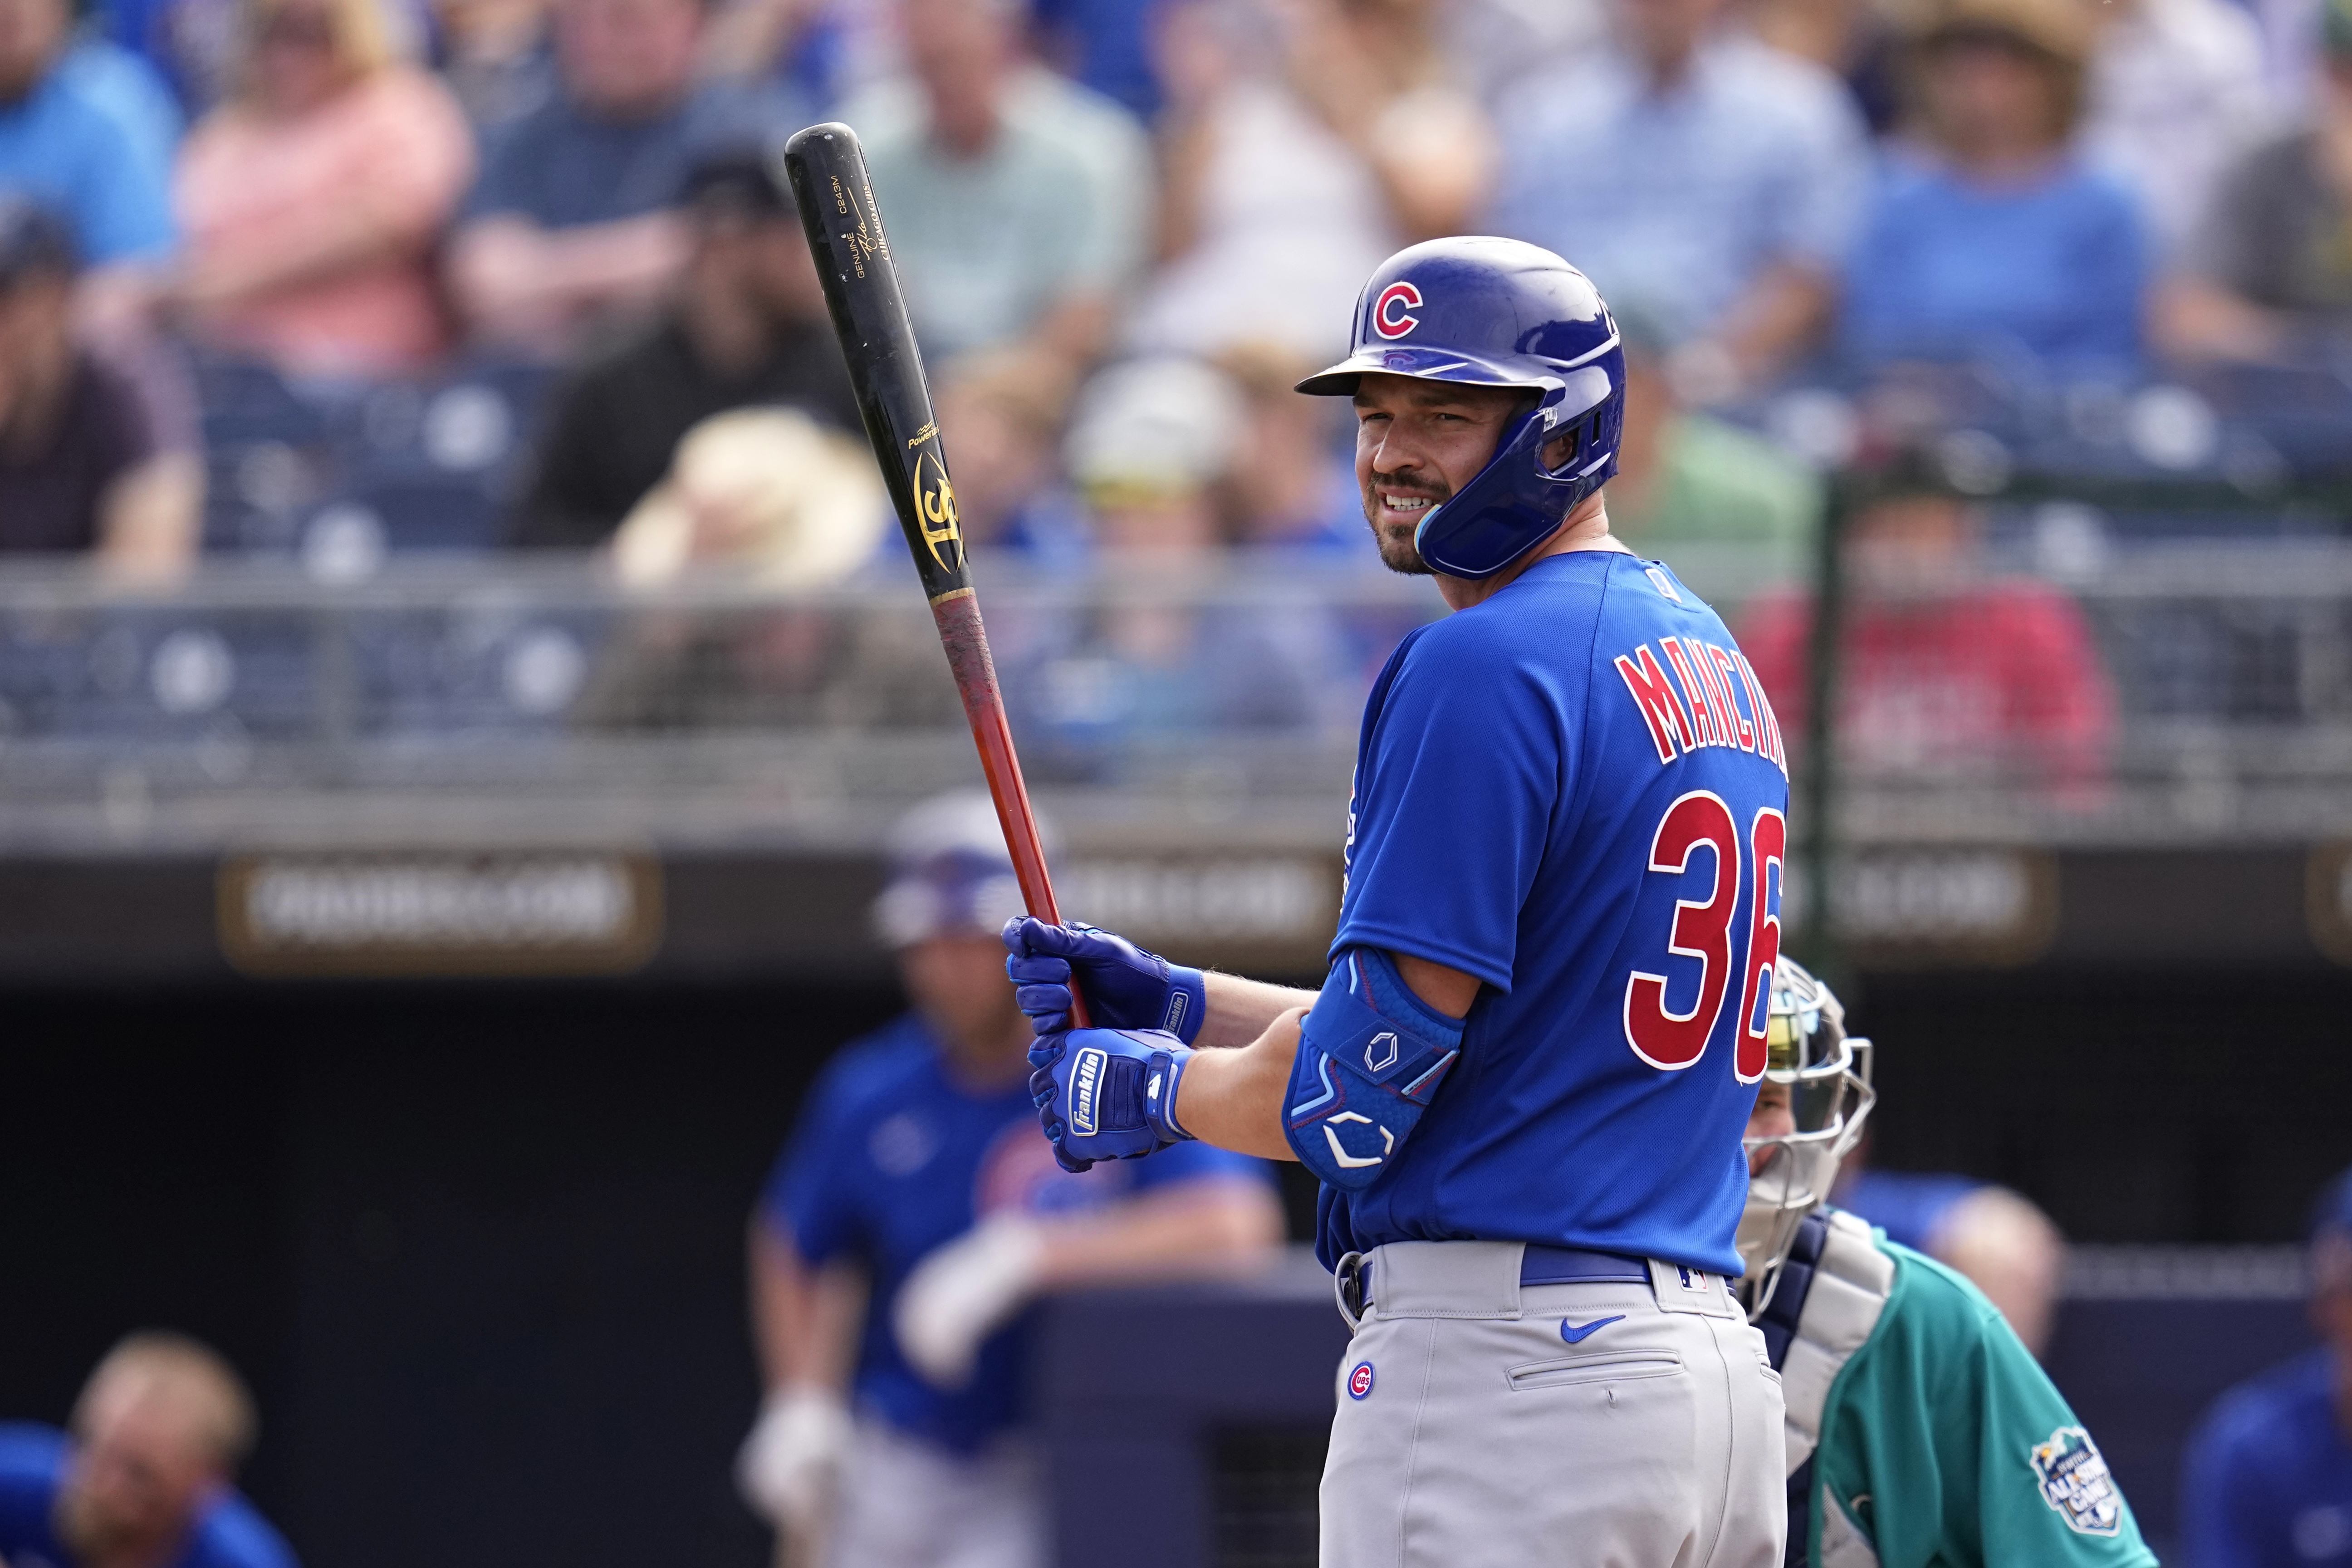 Photos: Chicago Cubs at spring training in Arizona